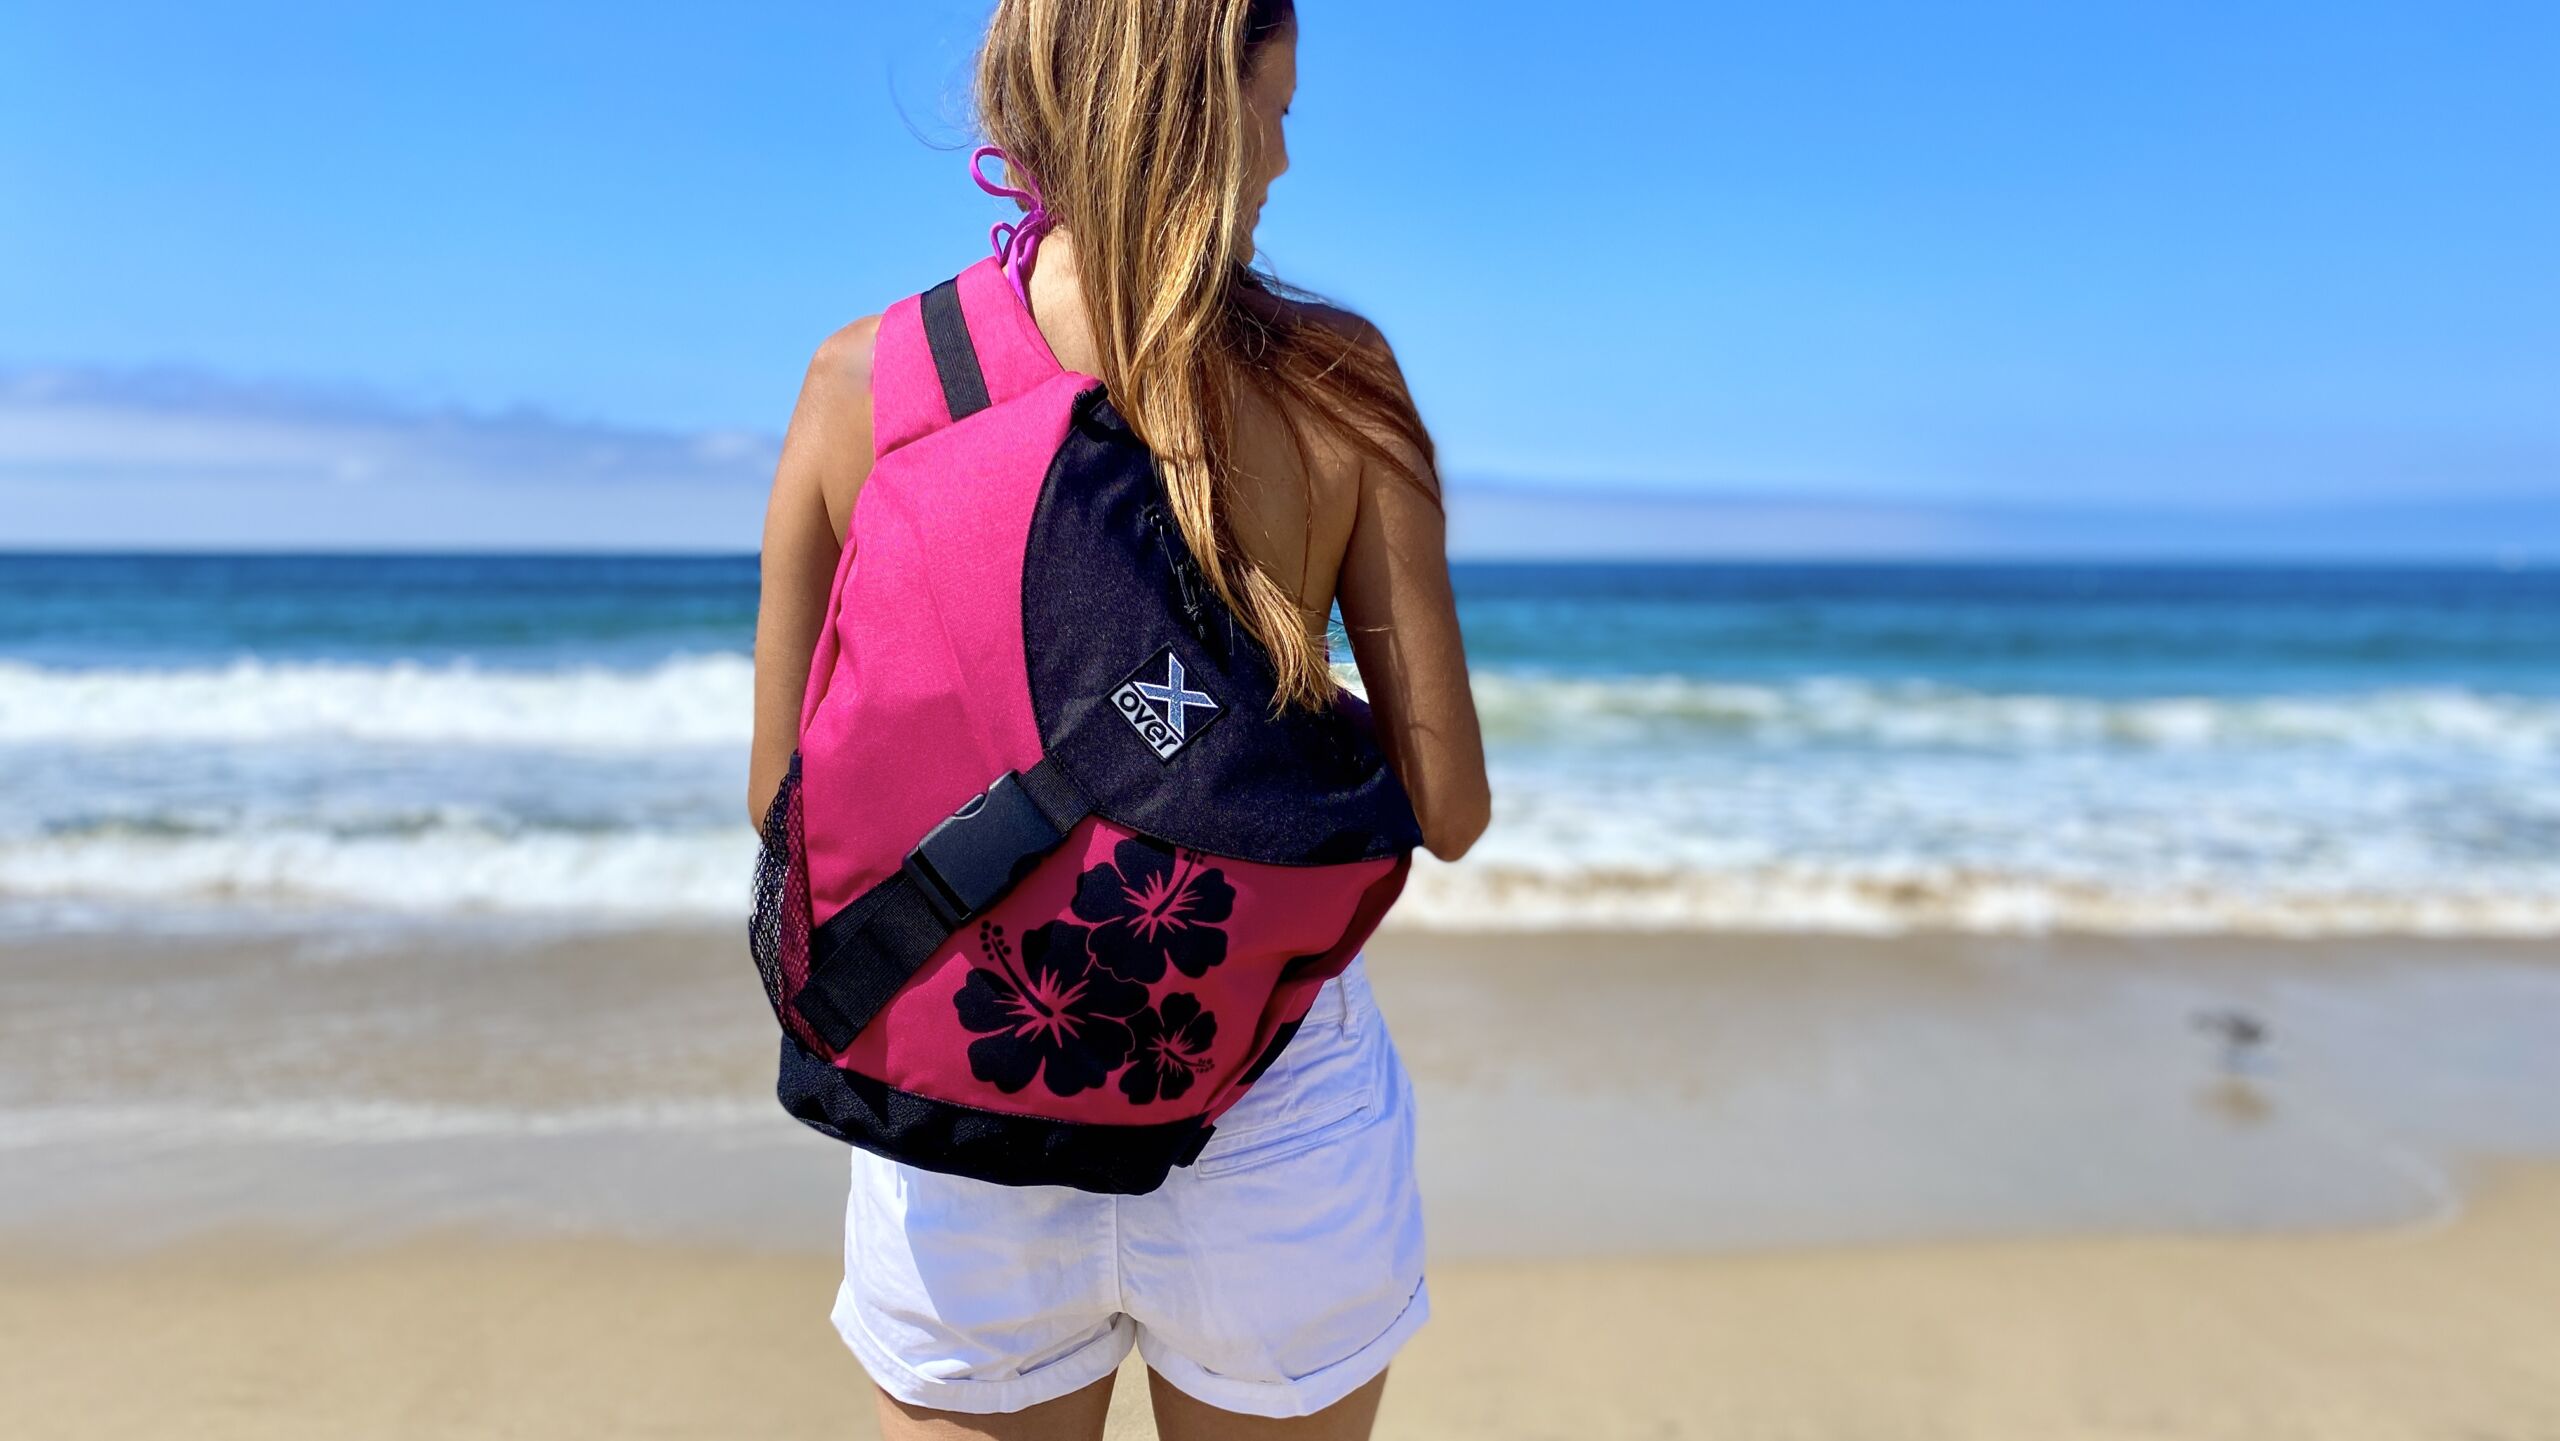 Woman wearing X-over bag standing at the beach